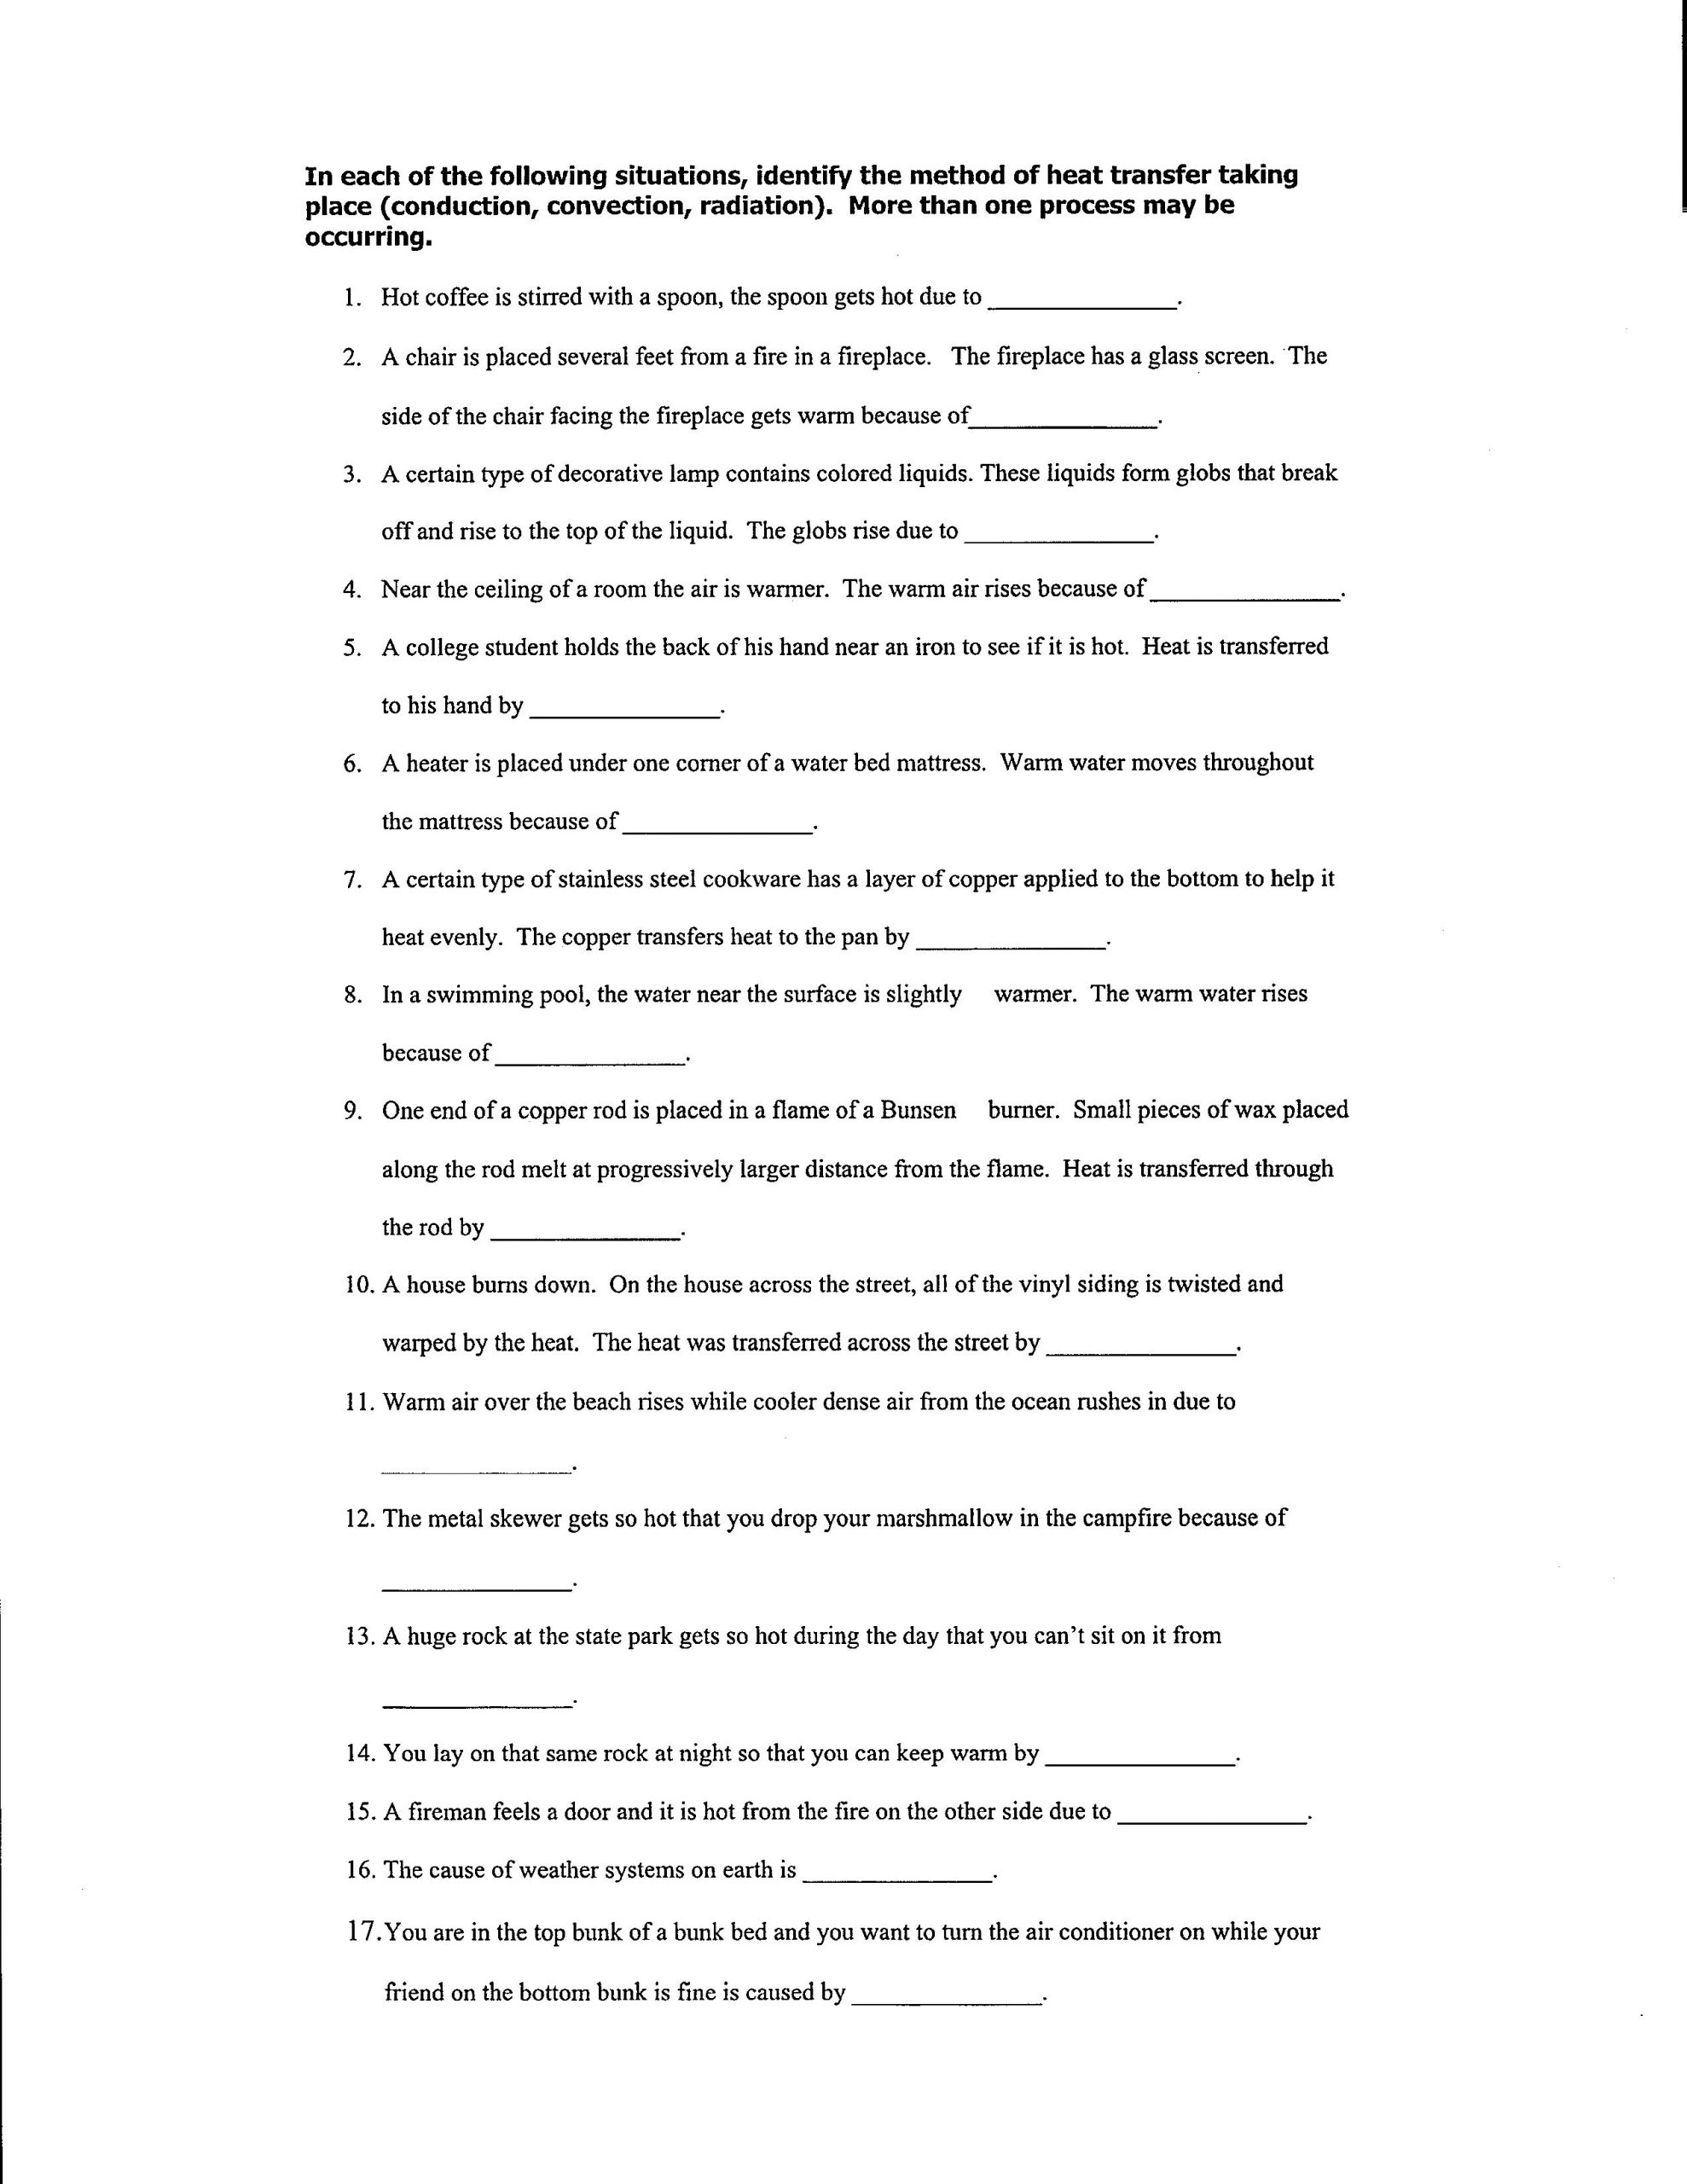 Conduction Convection Radiation Worksheet assignments Mr foreman S 7th and 8th Grade Classes